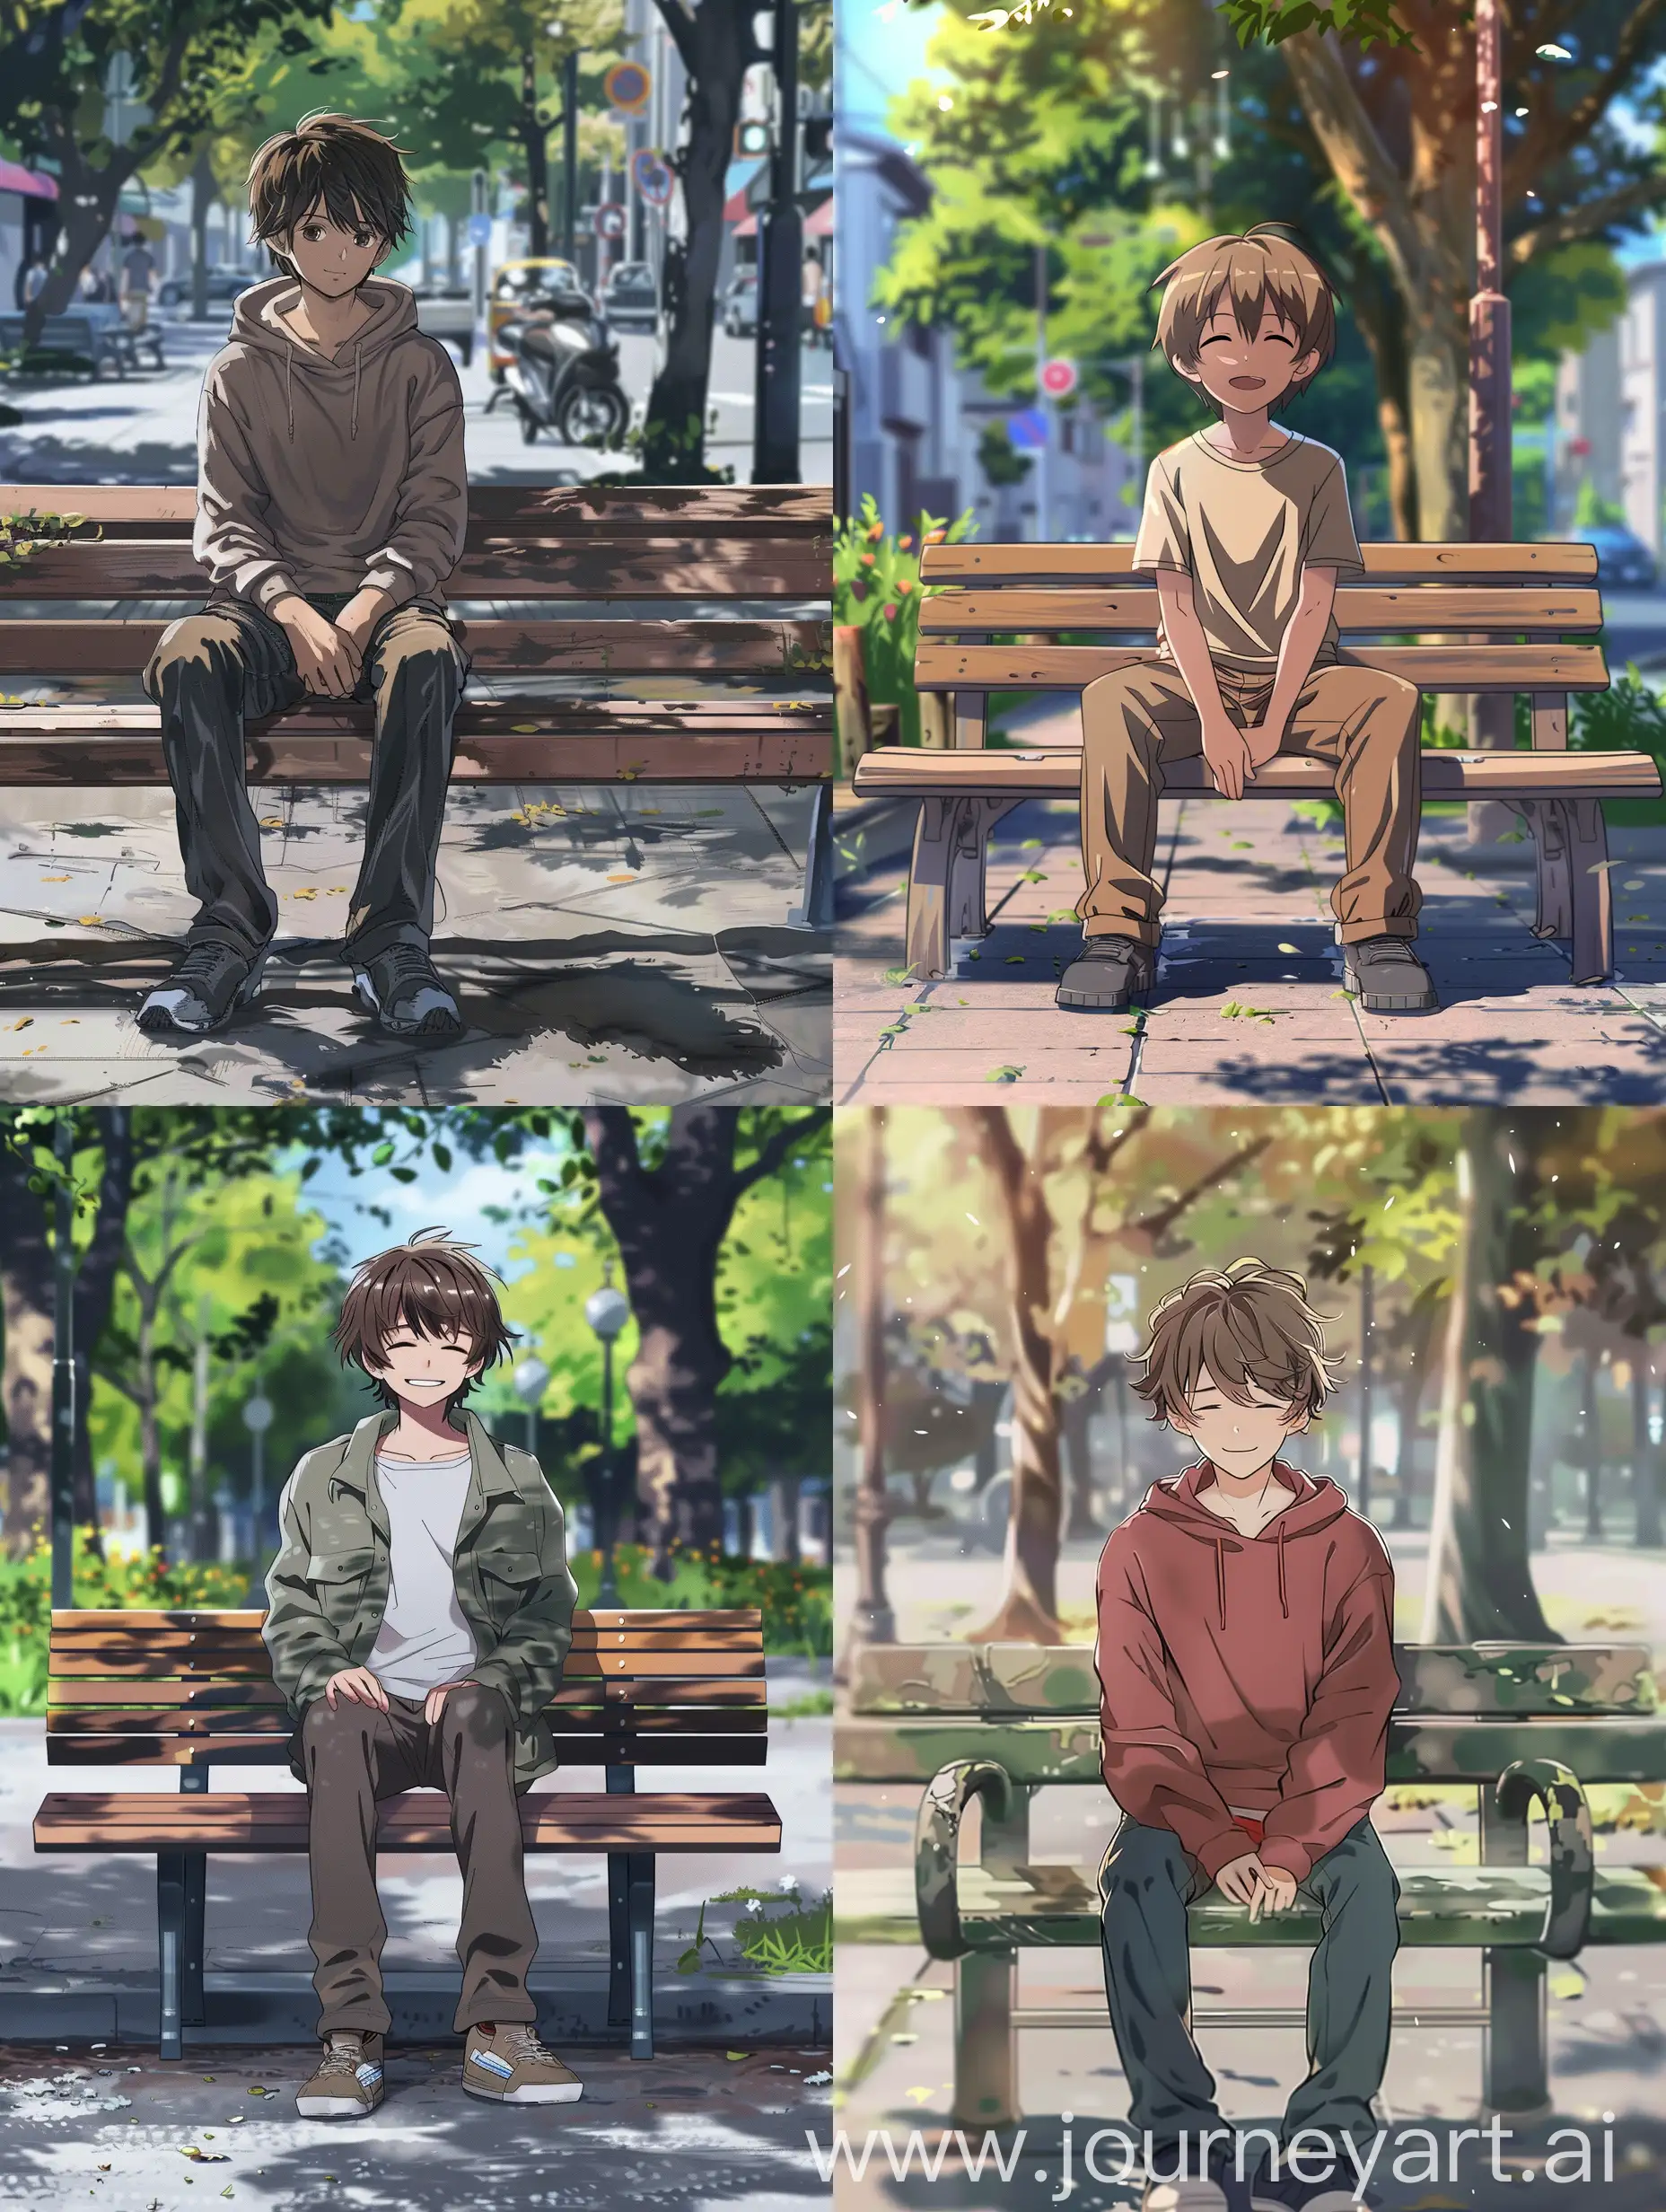 anime style,a character 18 year old boy sitting on a park bench exact front view,more focus on the boy he has a little smile.avoid distorted view of the boy.